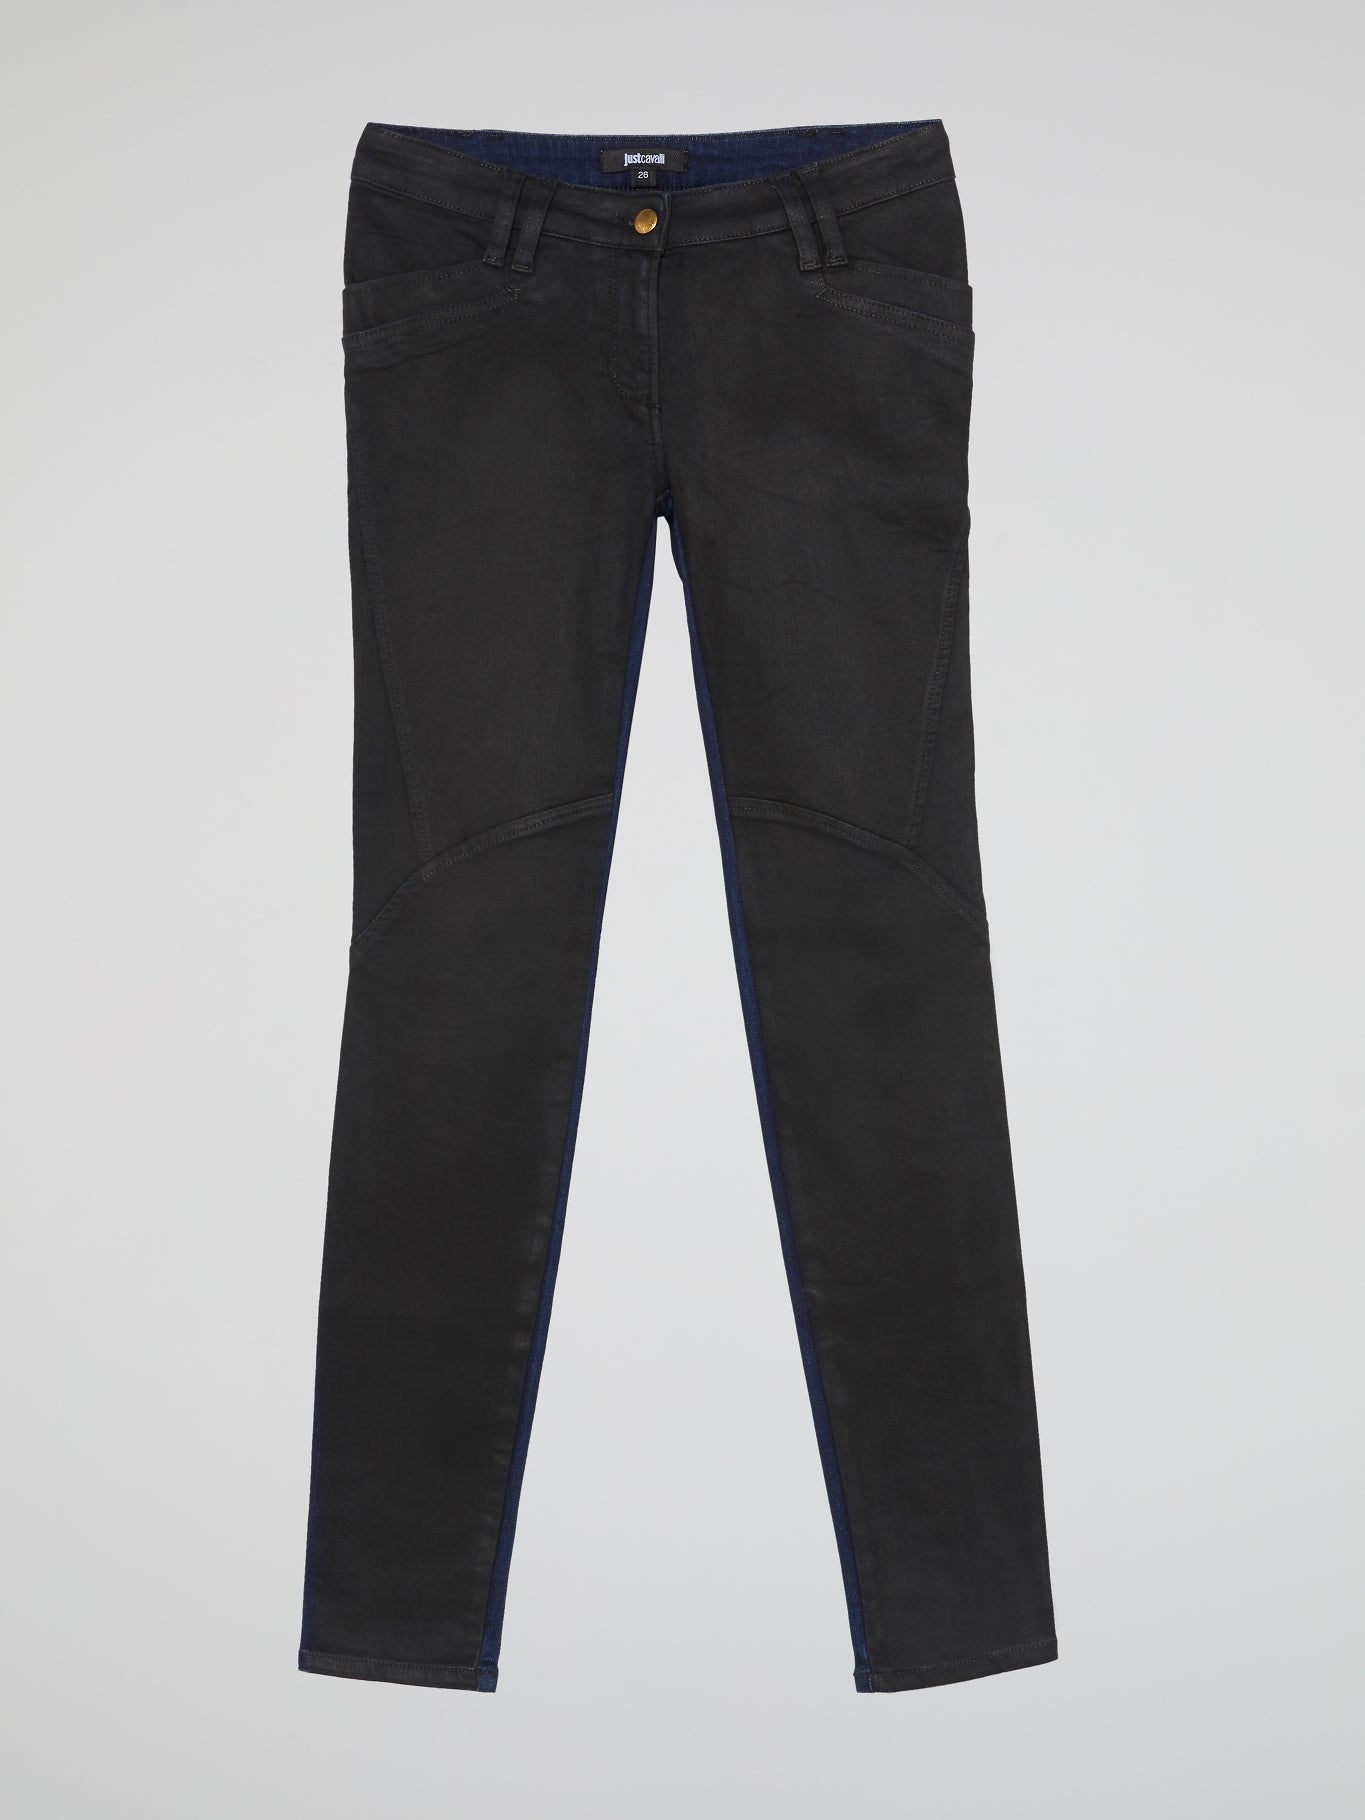 Two-Tone Slim Fit Jeans